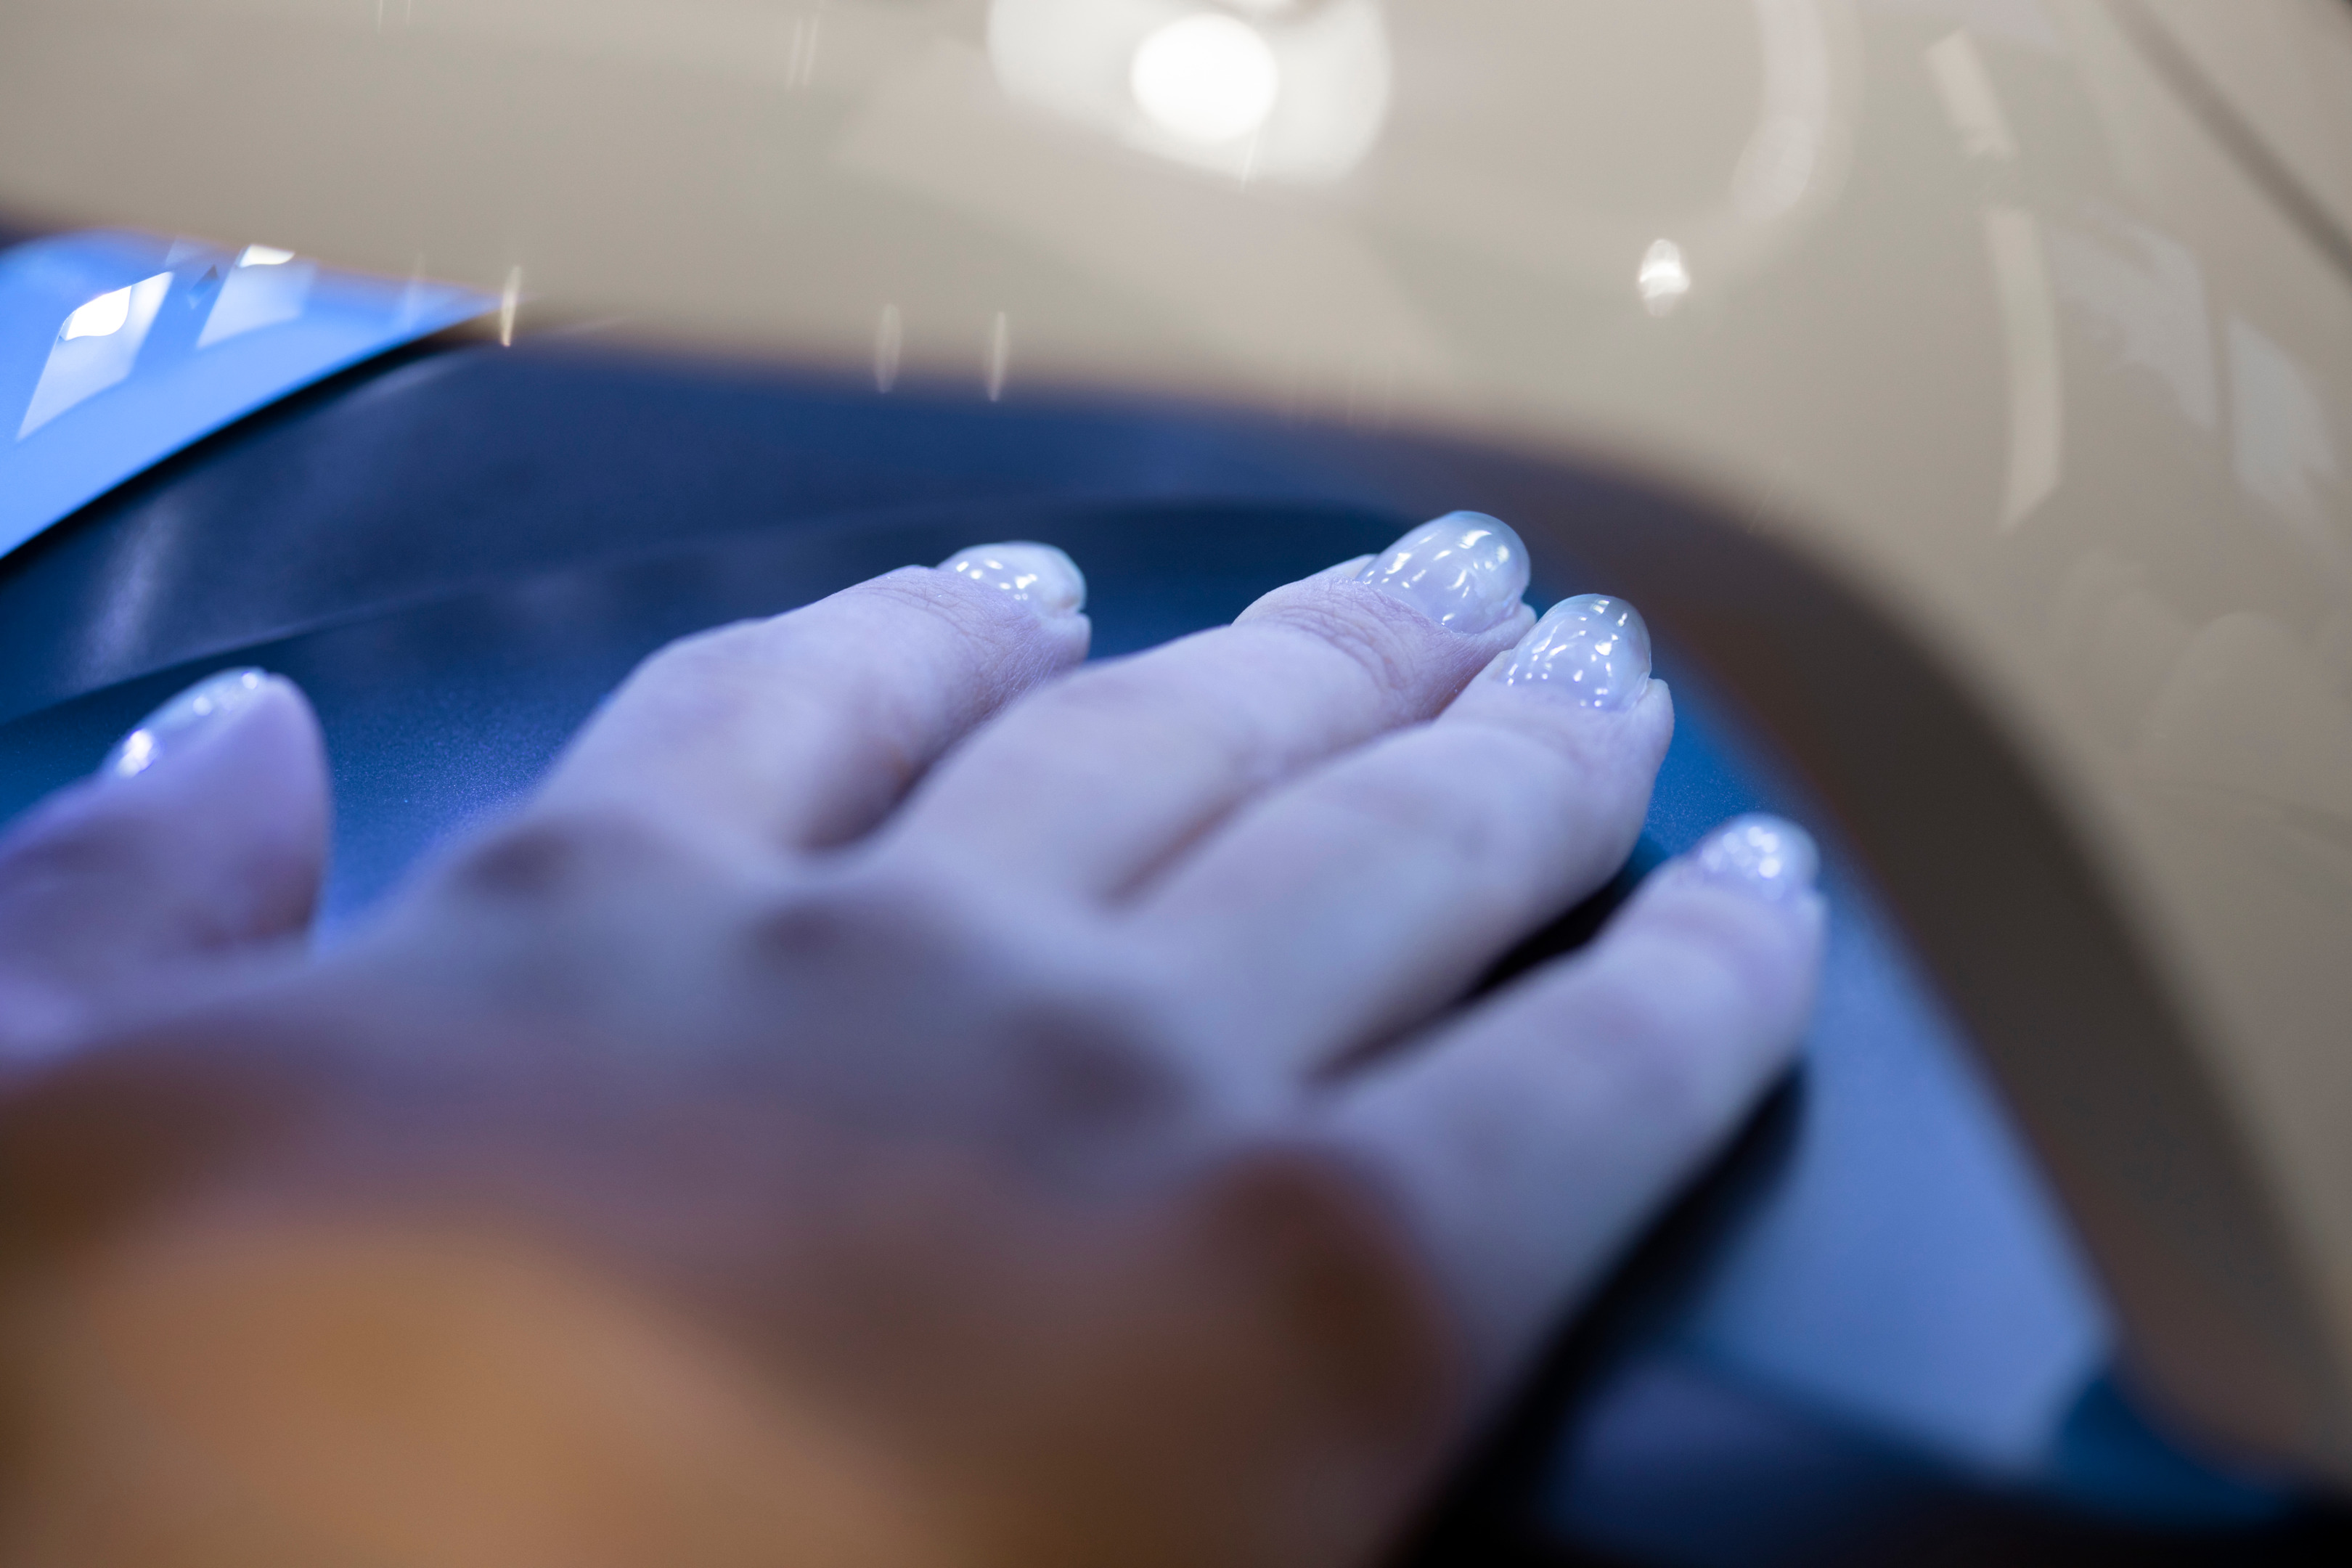 A person's fingers placed under a UV lamp